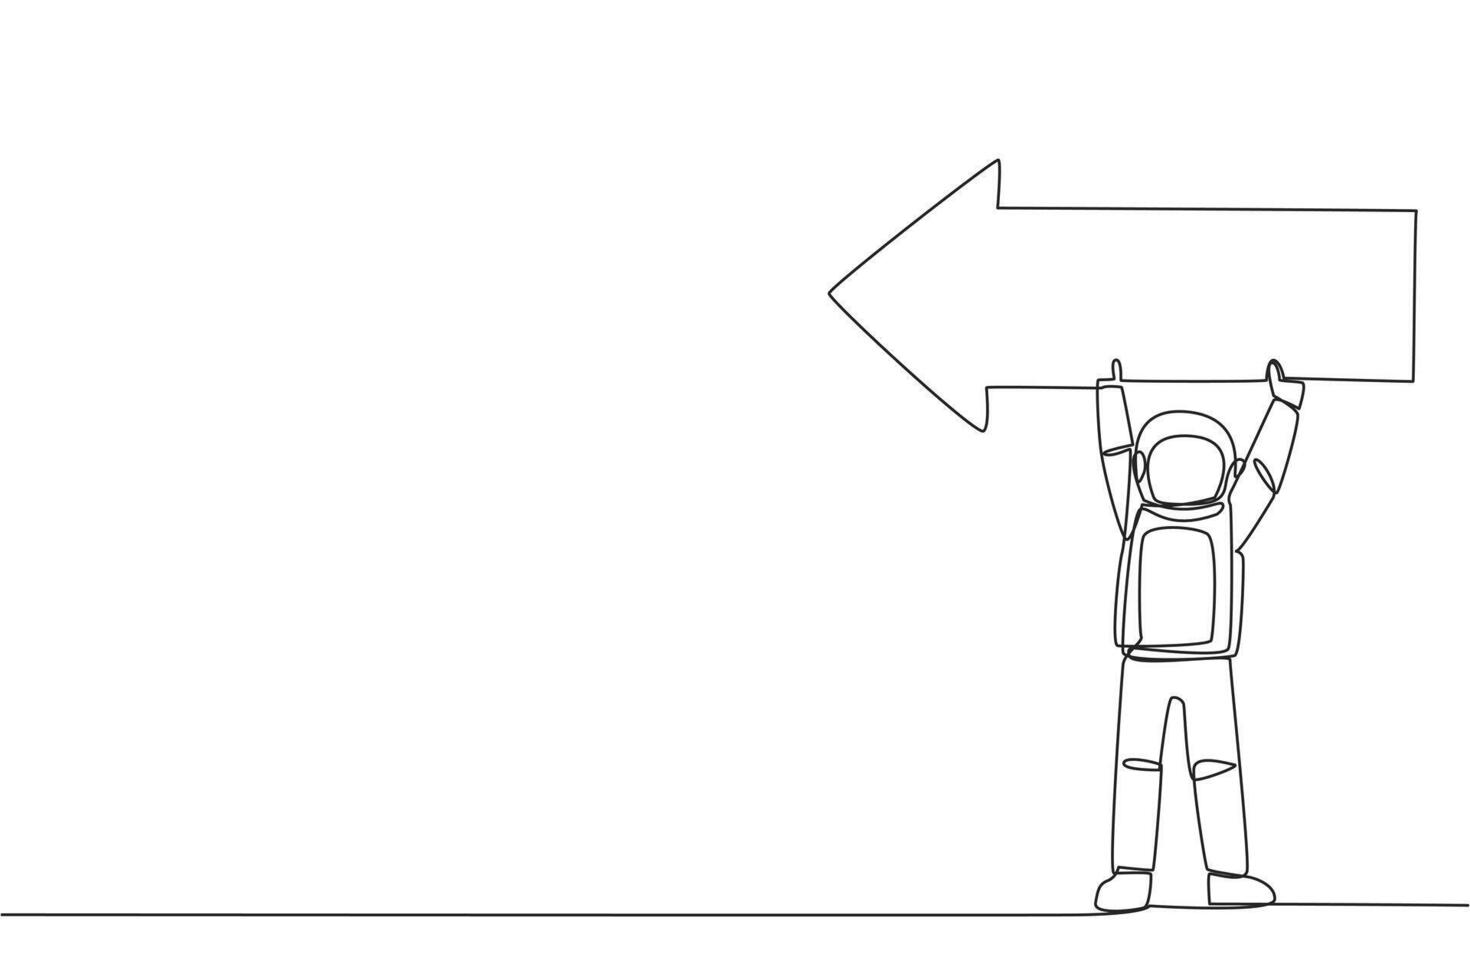 Single one line drawing young energetic astronaut lift the arrow-shaped puzzle. Teamwork by telling the direction where the spacecraft lands. Cosmonaut. Continuous line design graphic illustration vector